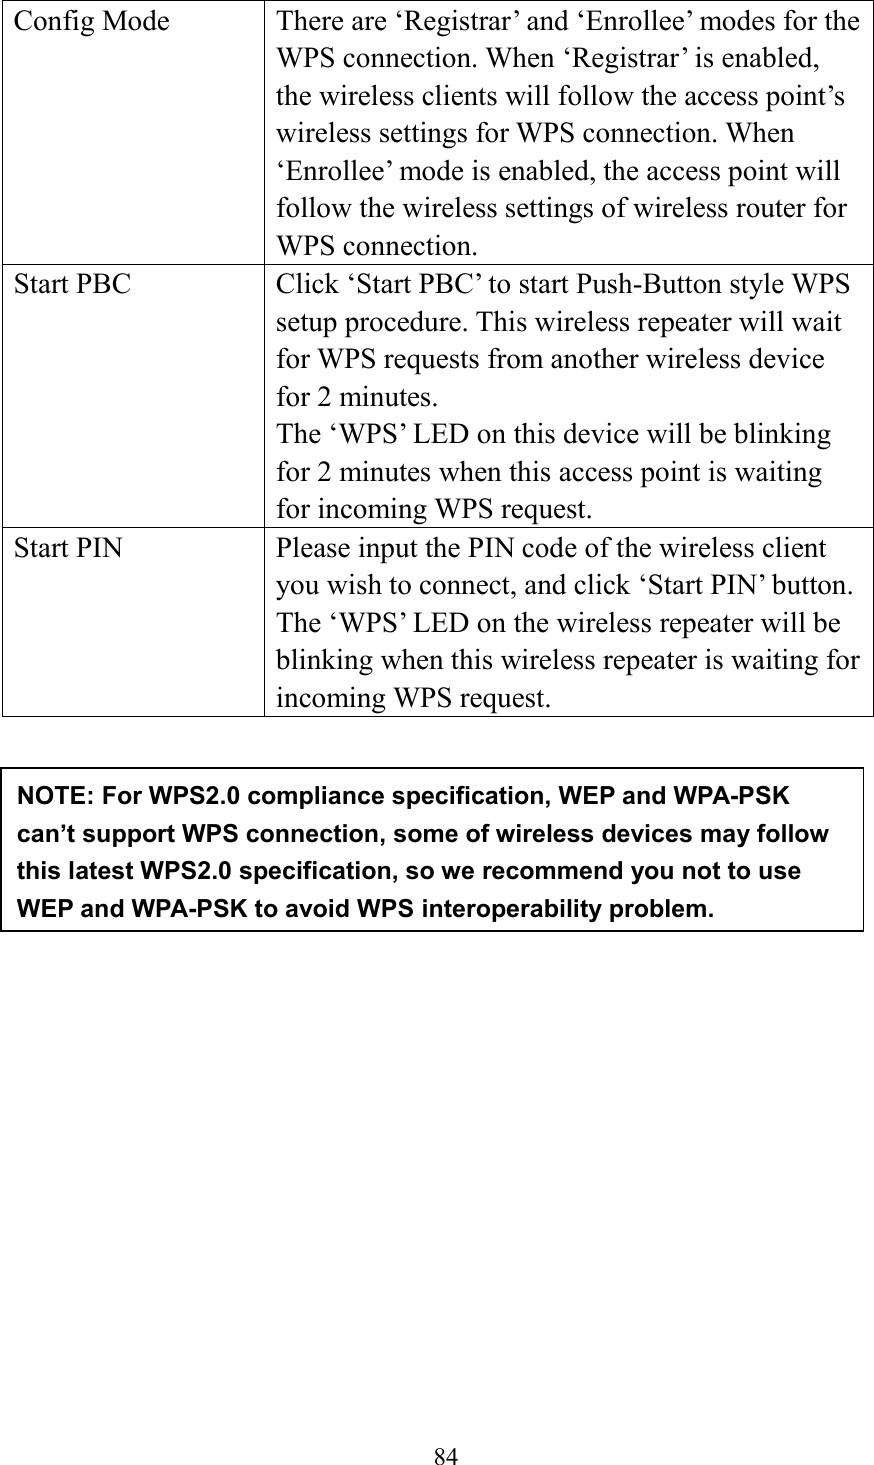  84  Config Mode There are ‘Registrar’ and ‘Enrollee’ modes for the WPS connection. When ‘Registrar’ is enabled, the wireless clients will follow the access point’s wireless settings for WPS connection. When ‘Enrollee’ mode is enabled, the access point will follow the wireless settings of wireless router for WPS connection. Start PBC Click ‘Start PBC’ to start Push-Button style WPS setup procedure. This wireless repeater will wait for WPS requests from another wireless device for 2 minutes. The ‘WPS’ LED on this device will be blinking for 2 minutes when this access point is waiting for incoming WPS request. Start PIN Please input the PIN code of the wireless client you wish to connect, and click ‘Start PIN’ button. The ‘WPS’ LED on the wireless repeater will be blinking when this wireless repeater is waiting for incoming WPS request.            NOTE: For WPS2.0 compliance specification, WEP and WPA-PSK can’t support WPS connection, some of wireless devices may follow this latest WPS2.0 specification, so we recommend you not to use WEP and WPA-PSK to avoid WPS interoperability problem.      